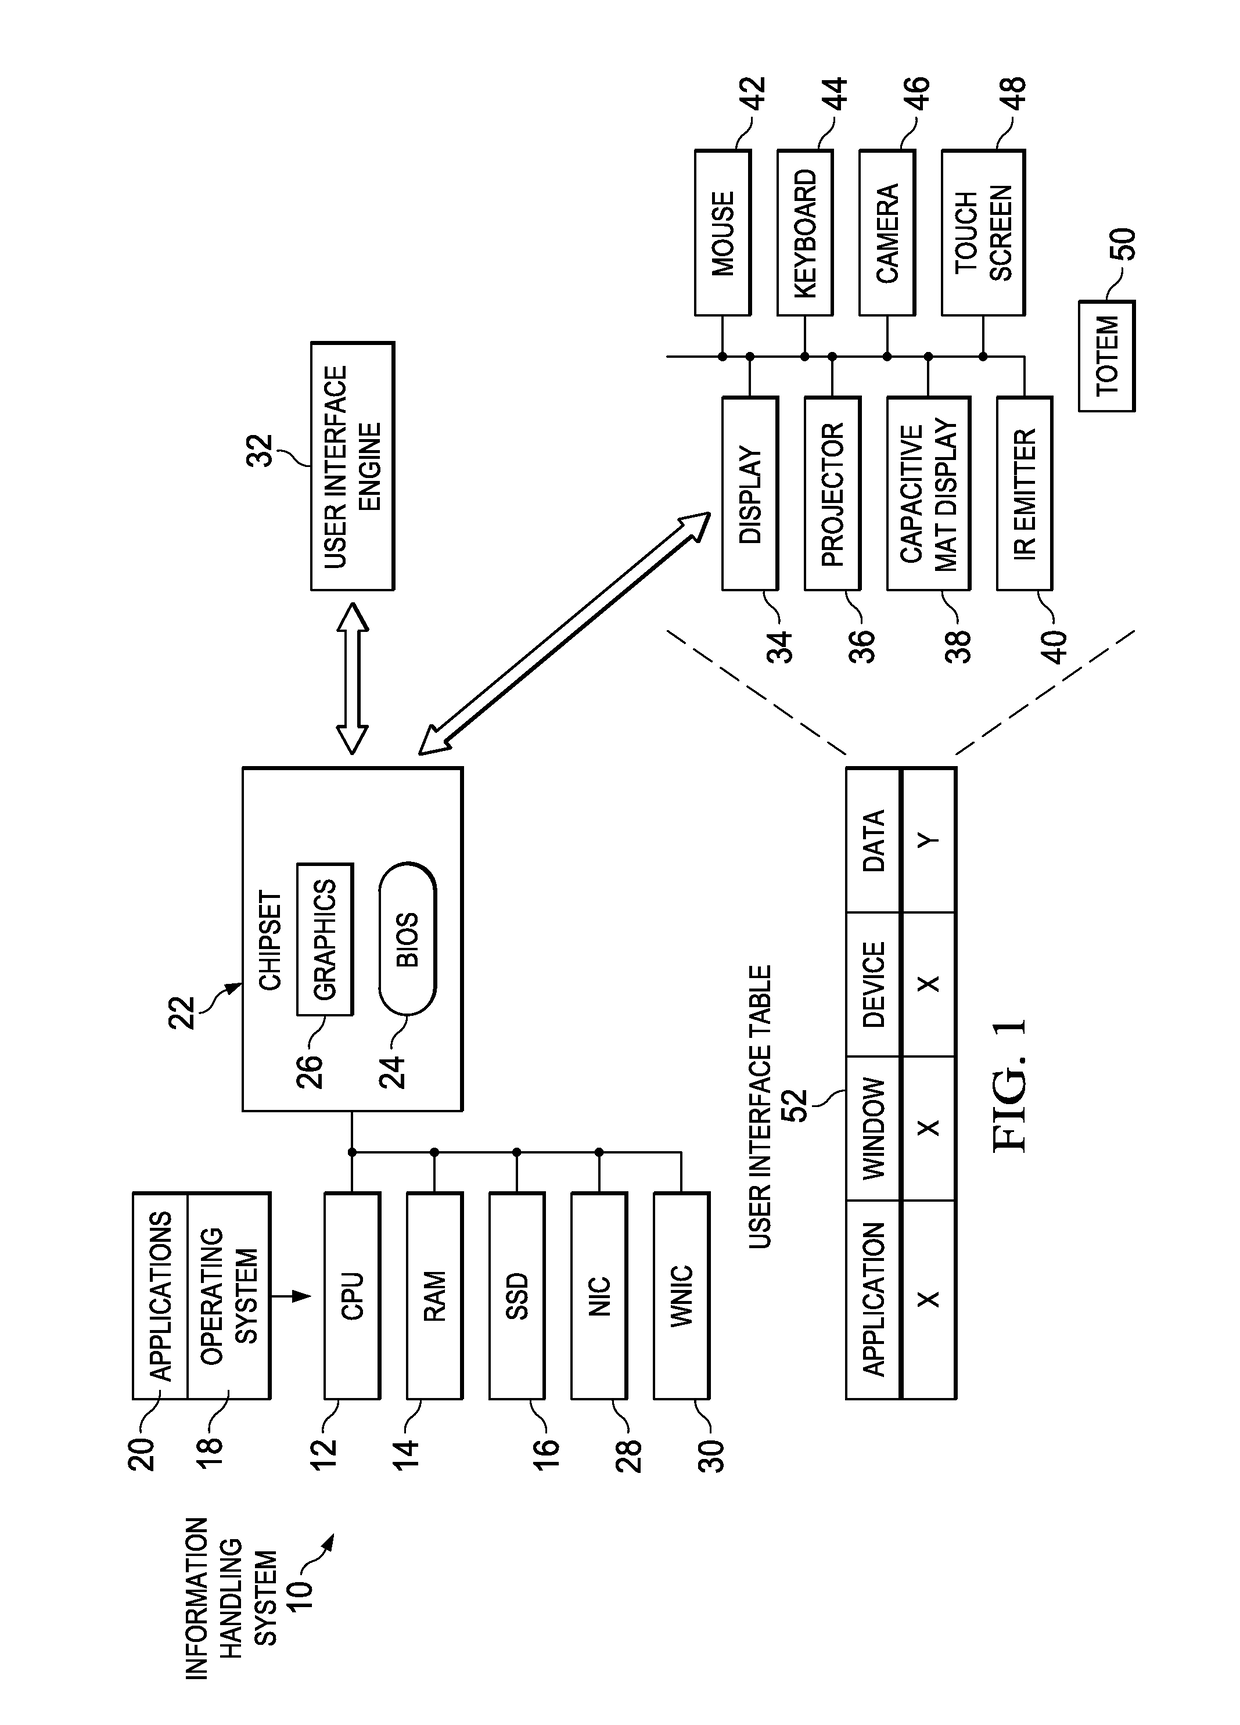 Dynamic display resolution management for an immersed information handling system environment